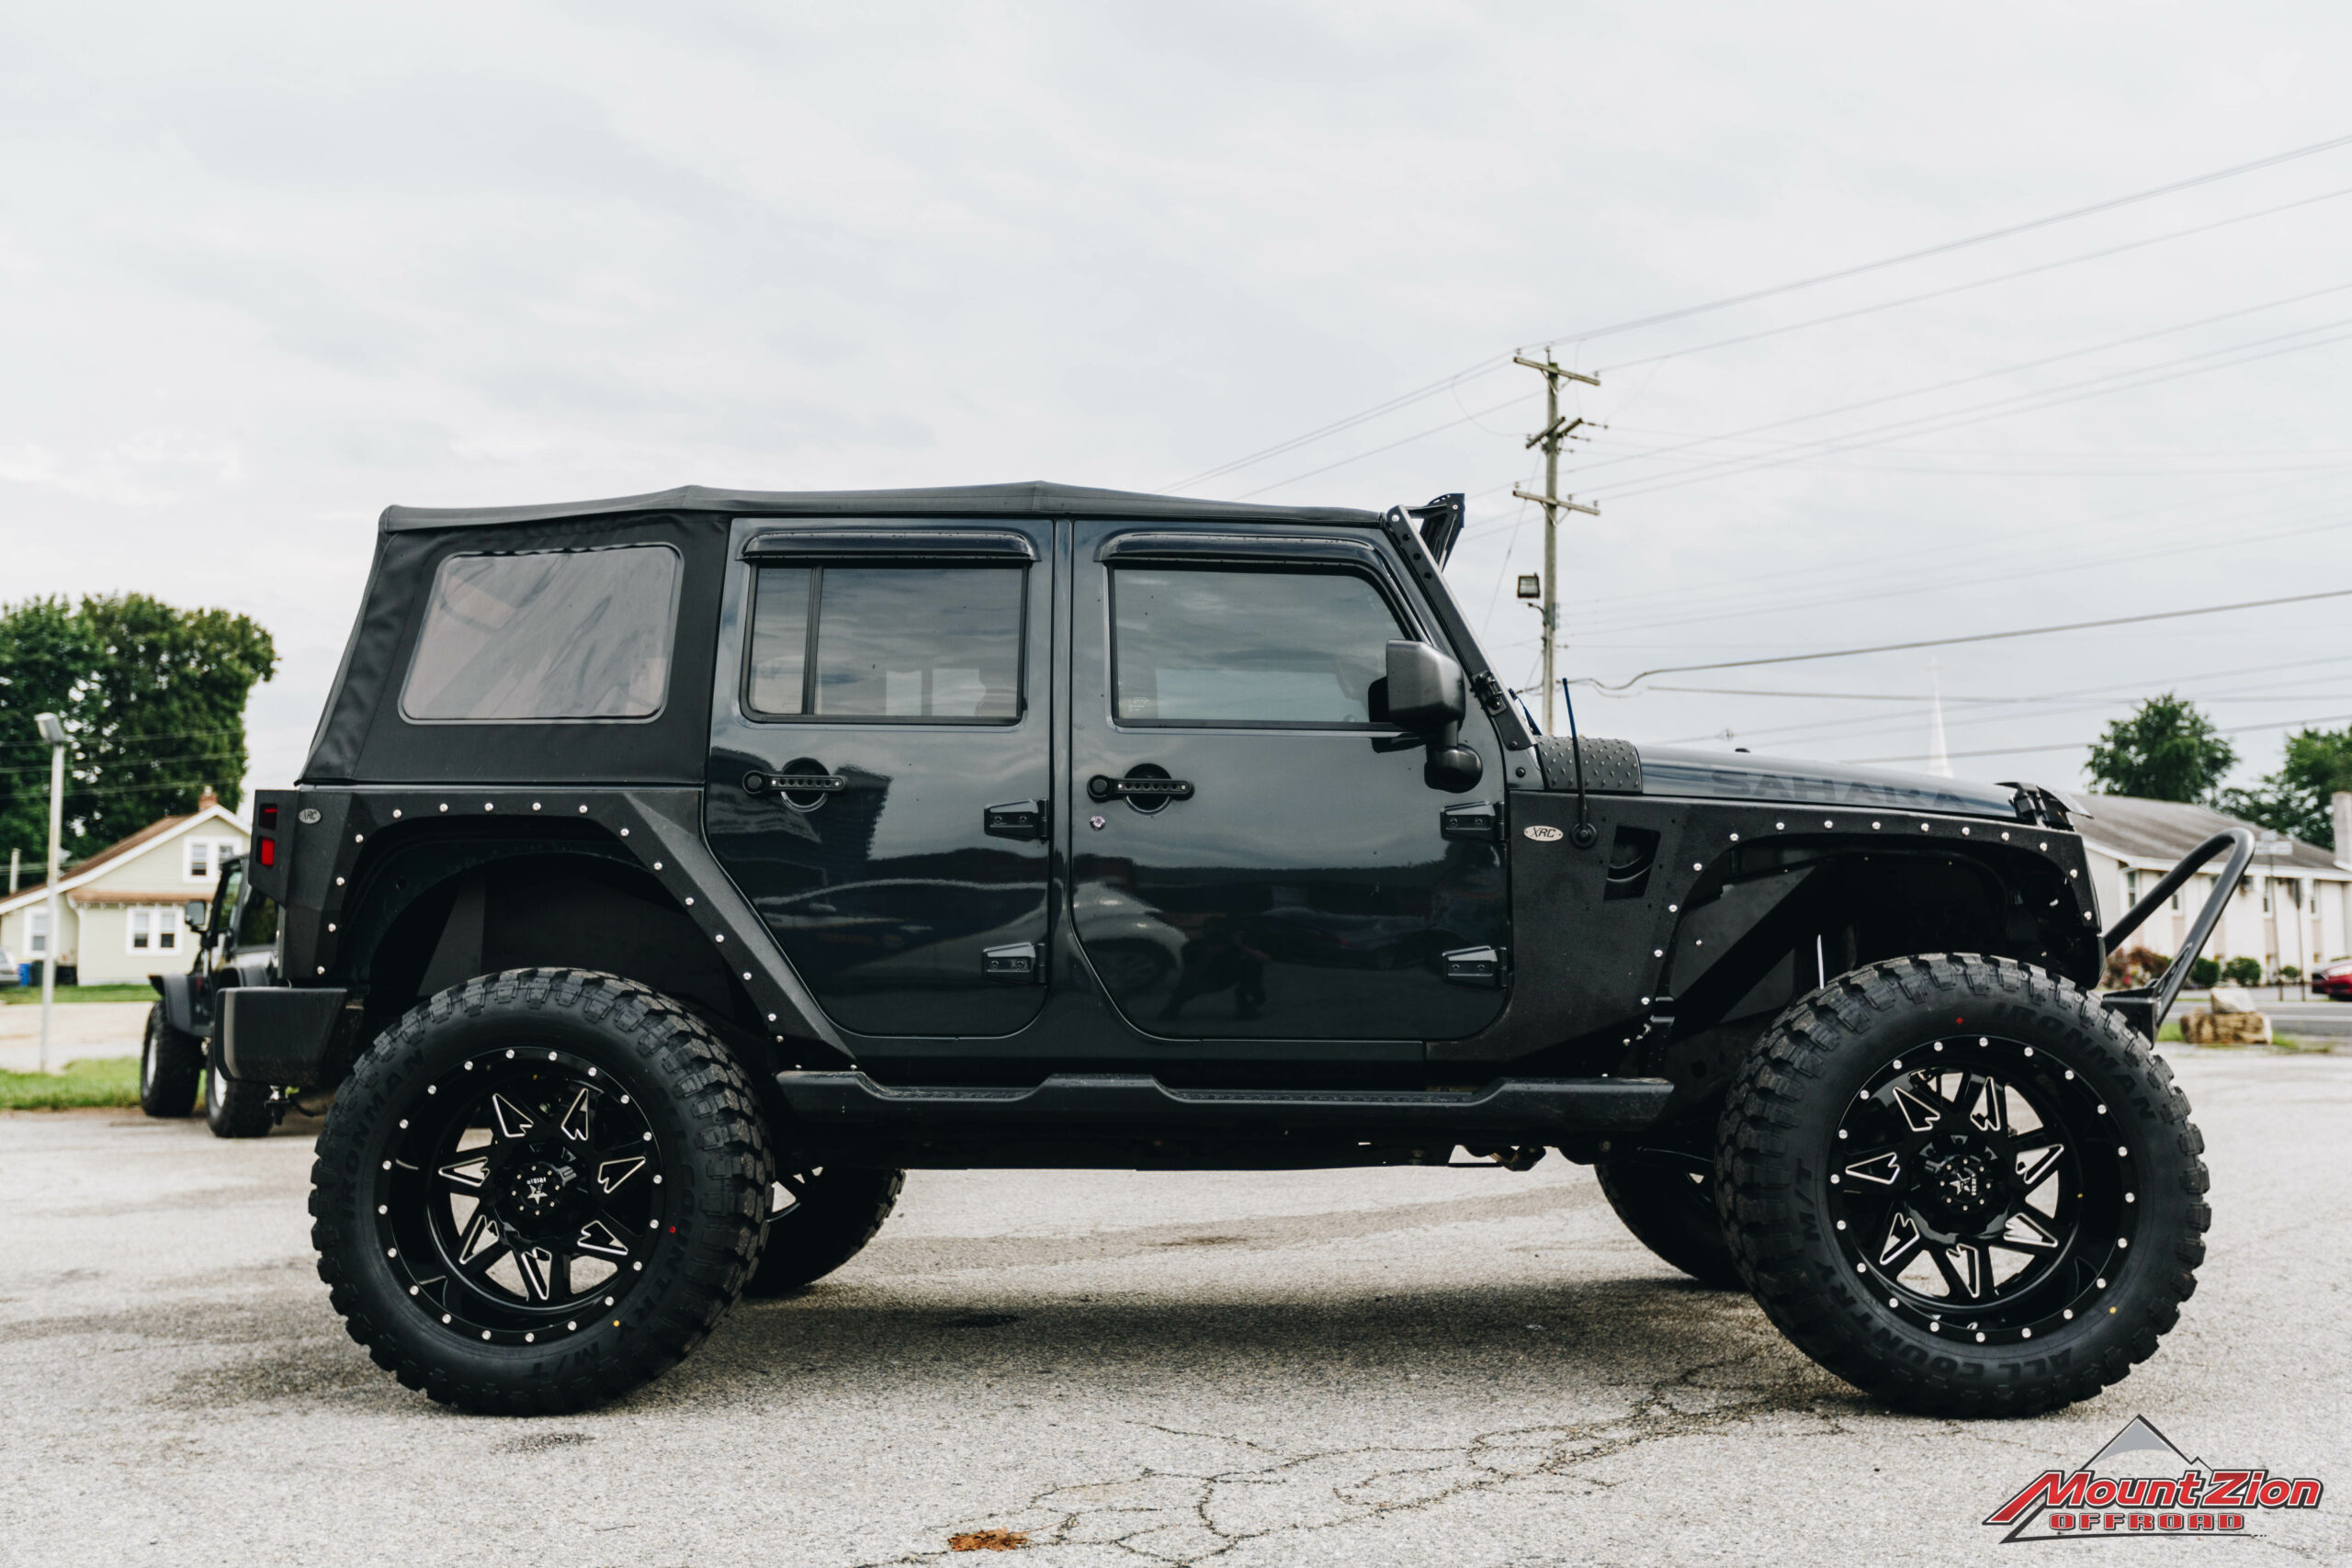 2017 Jeep Wrangler Unlimited Sahara - Mount Zion Offroad